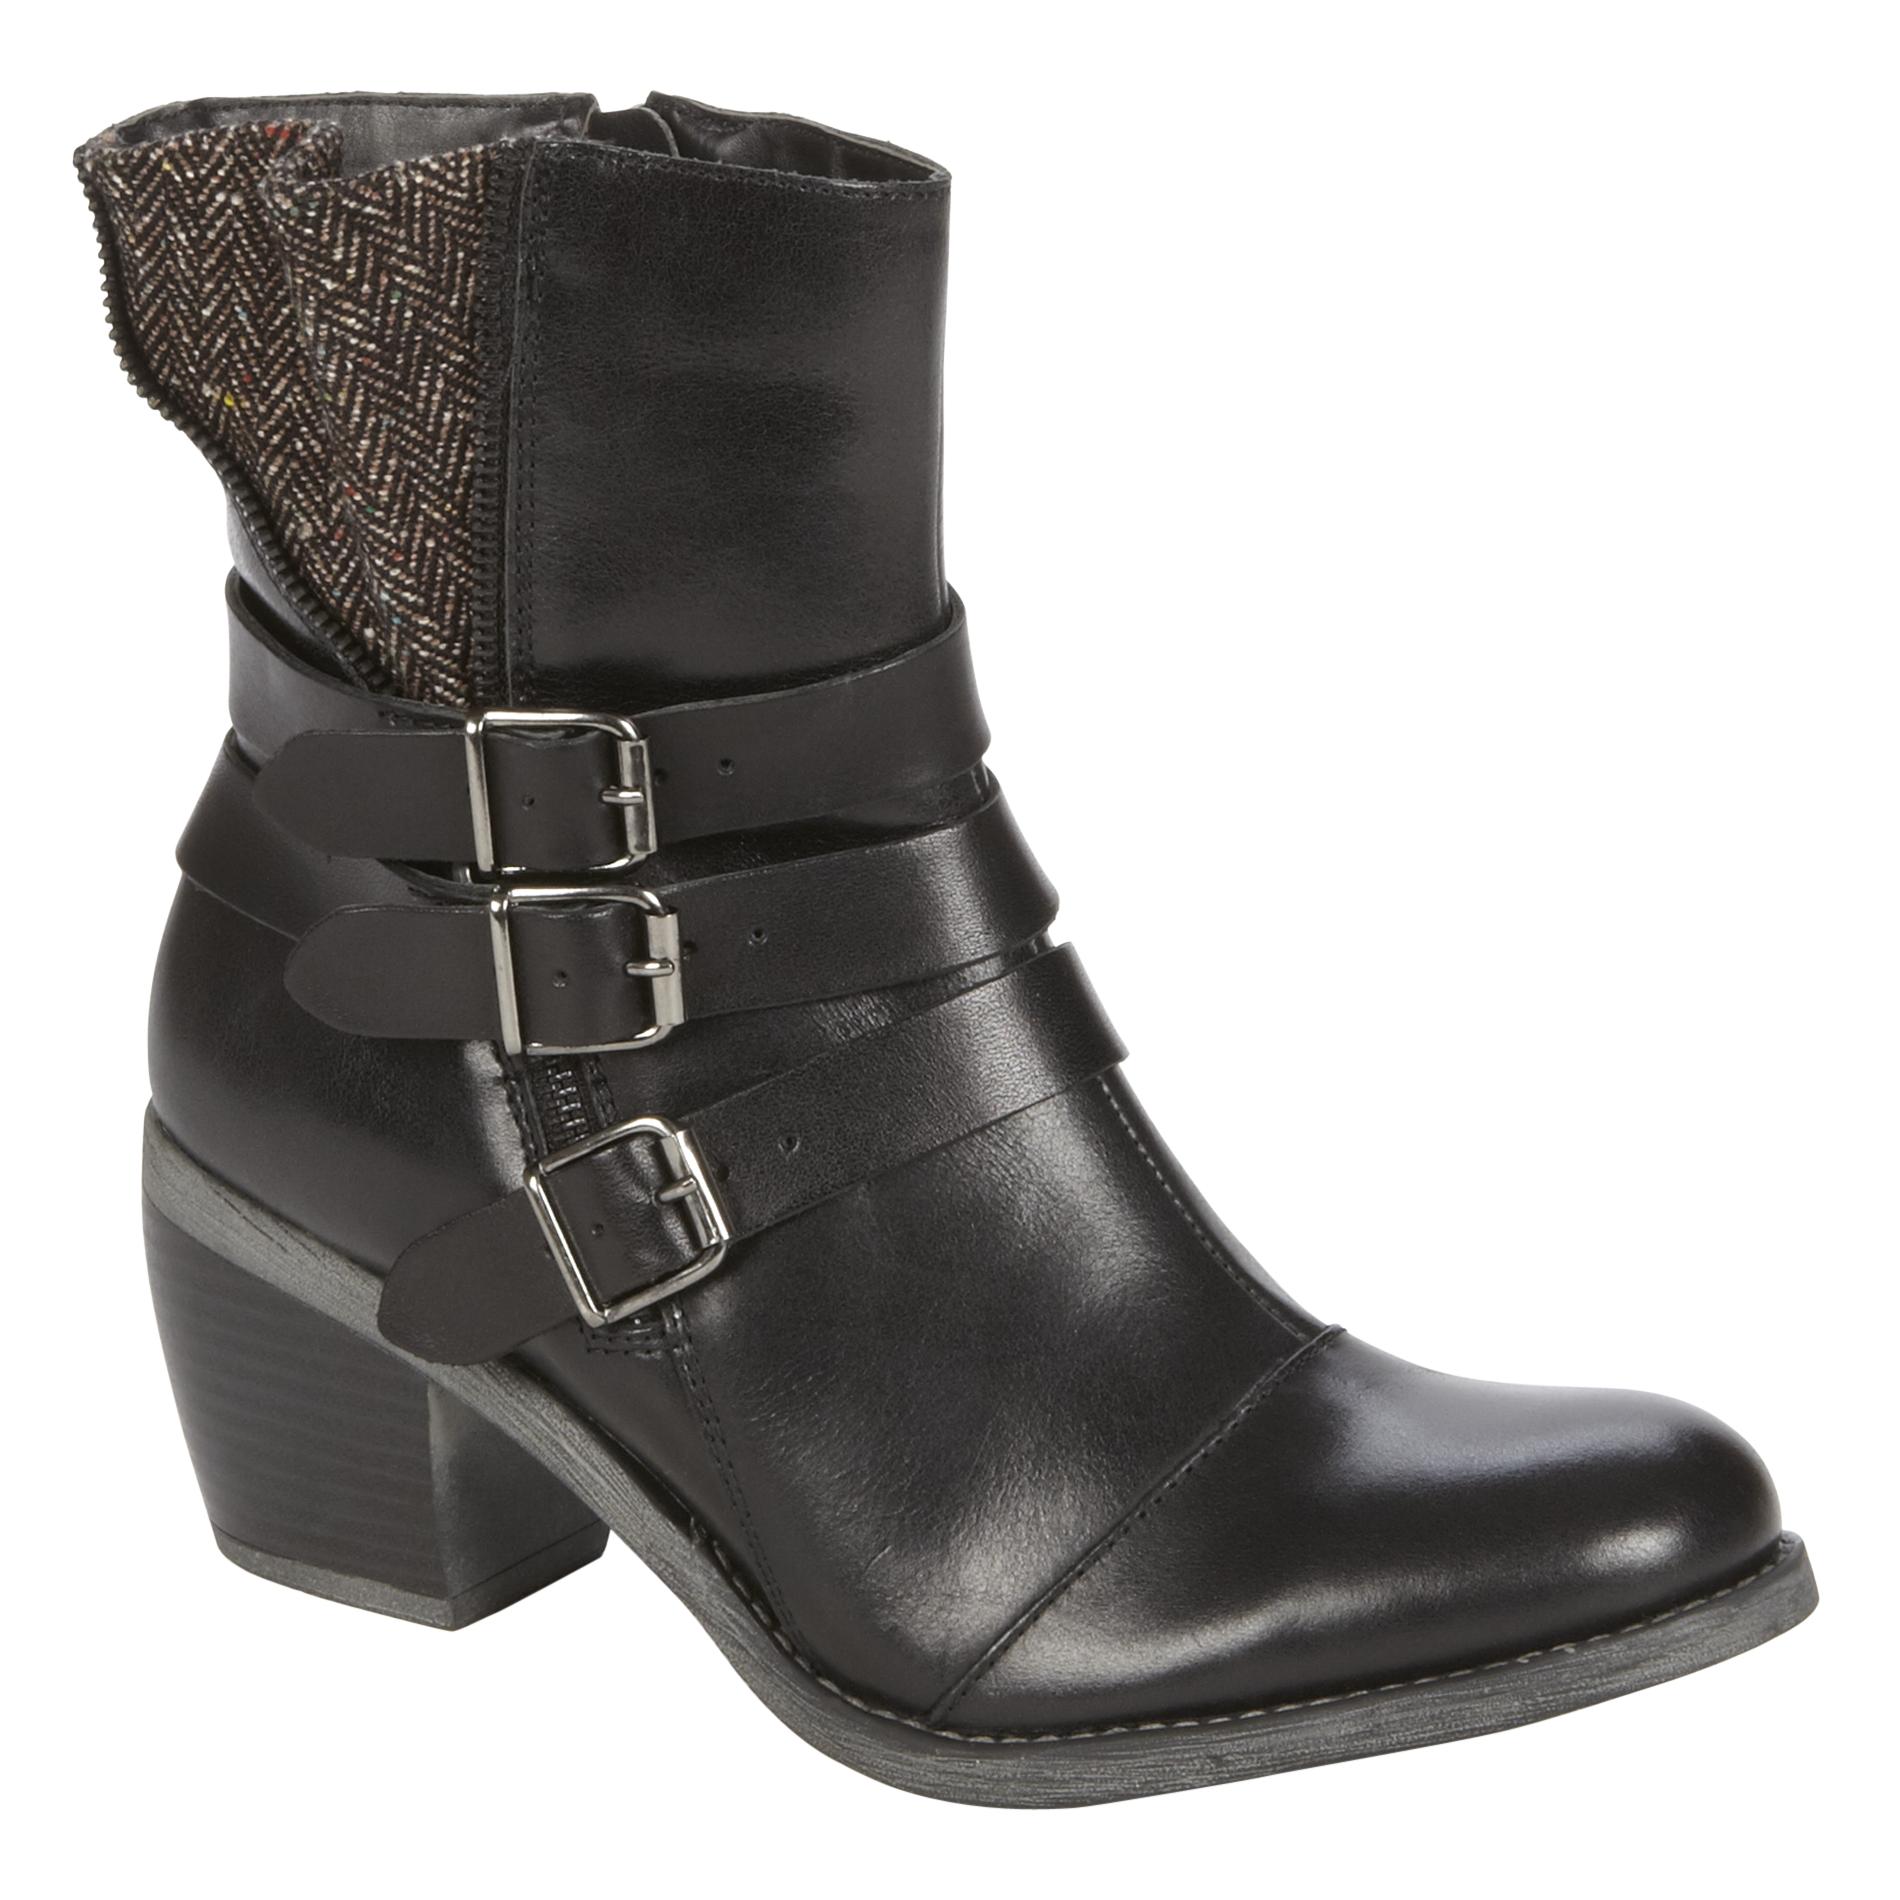 Hush Puppies Women's Weather Ankle Boot Rustique - Black